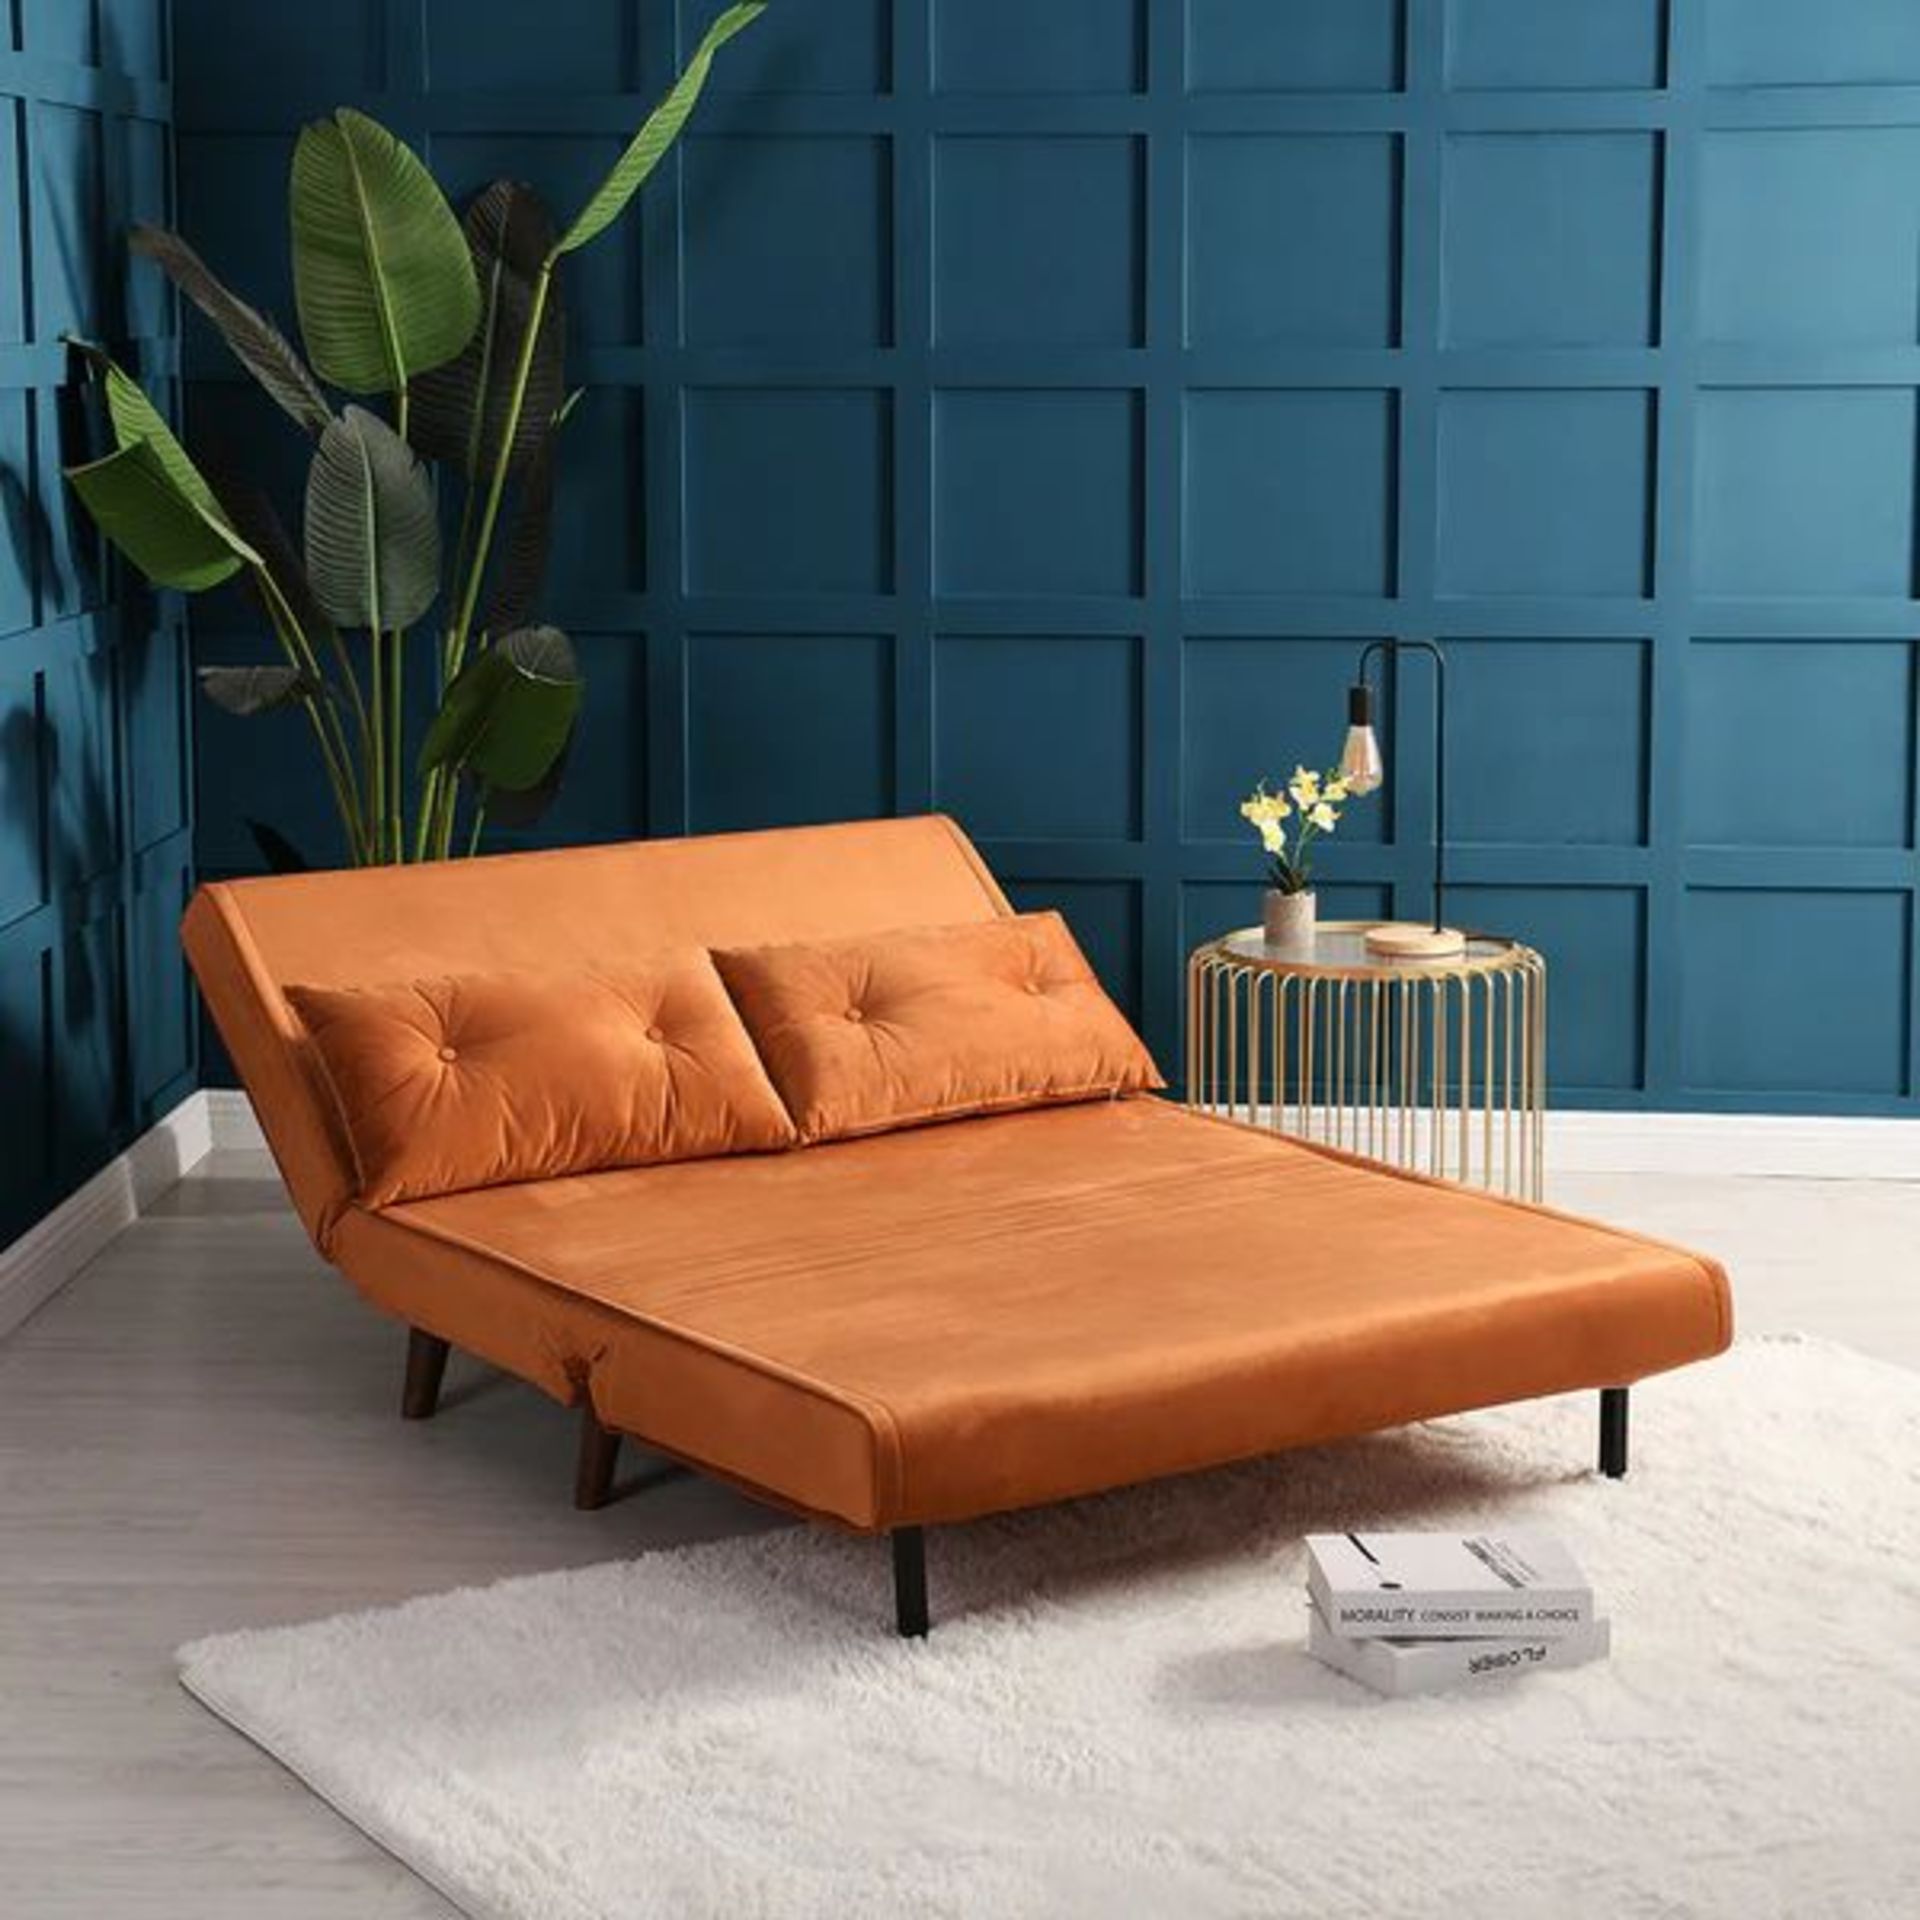 Algo Sofabed with Cushions in Orange Velvet 2 Seater. - R14. RRP £479.99. Upholstered with beautiful - Bild 2 aus 2